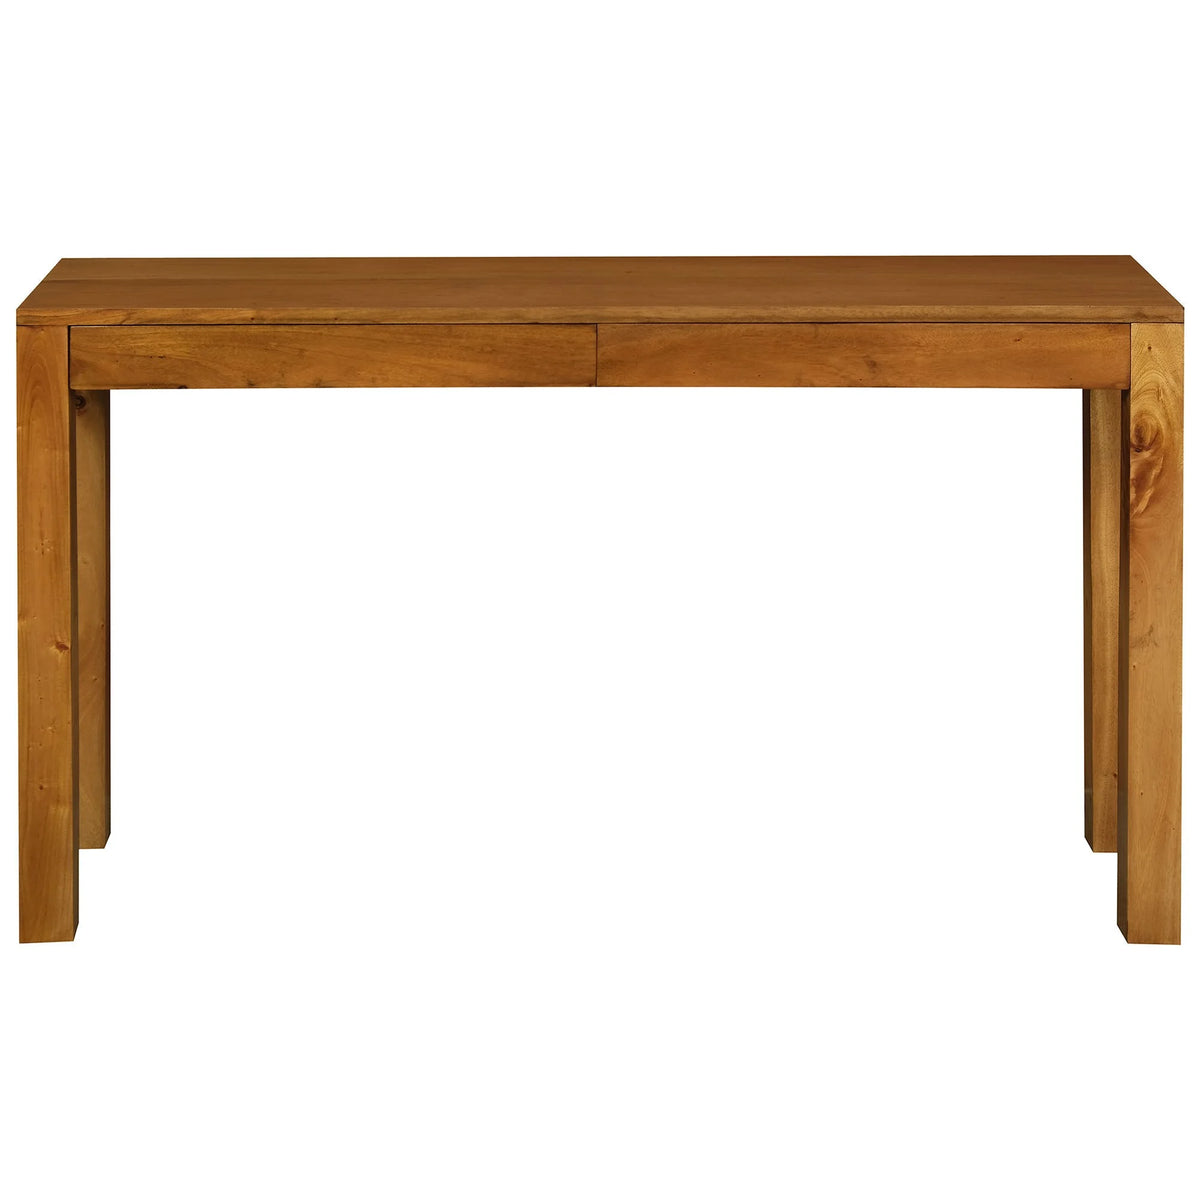 Amsterdam Timber 2 Drawers Console Table - Light Pecan - Notbrand